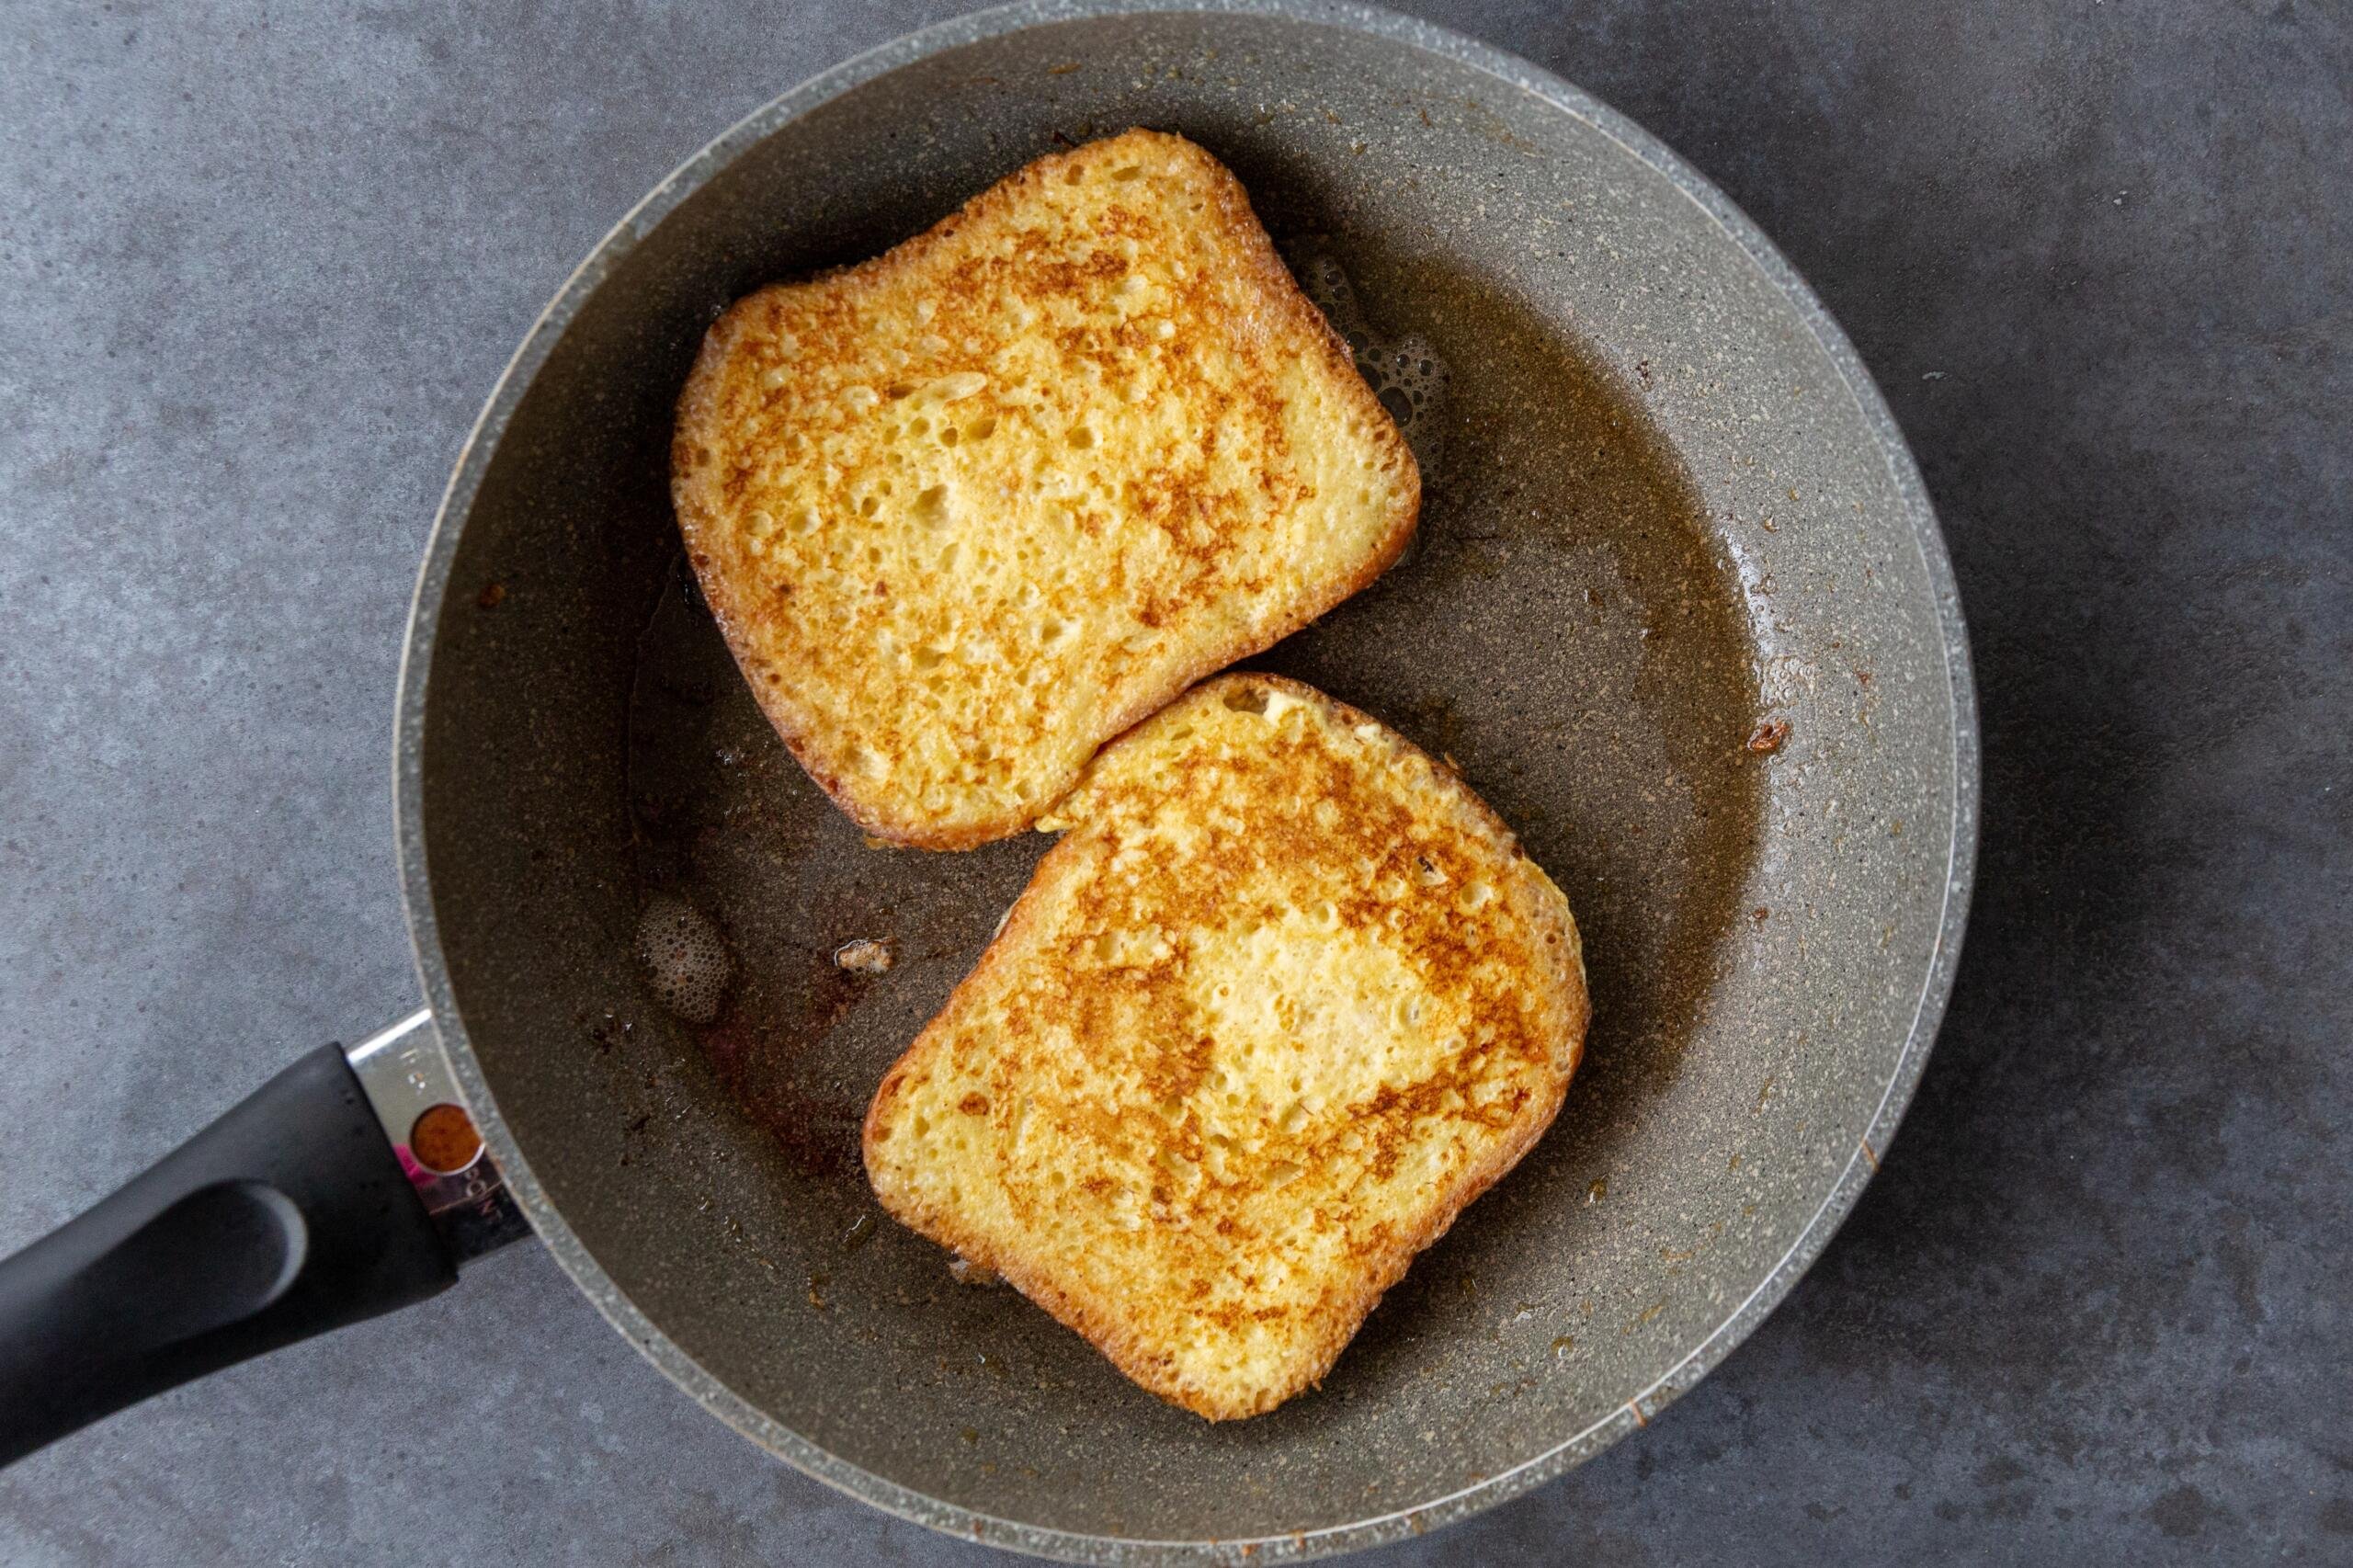 https://cdn.momsdish.com/wp-content/uploads/2021/04/Easiest-French-Toast-06-scaled.jpg